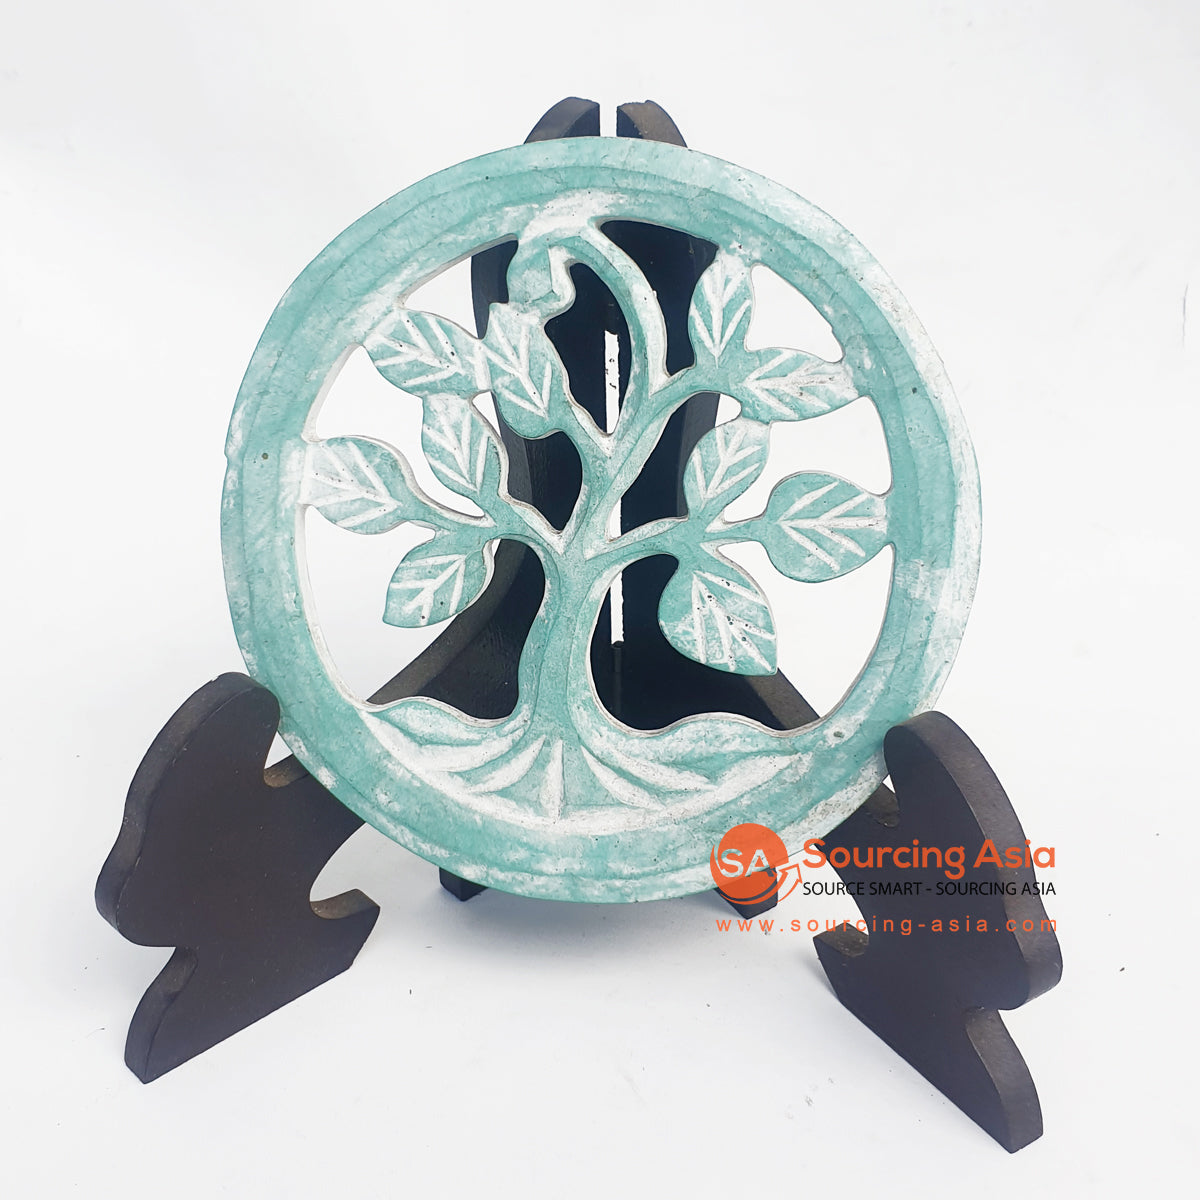 LUHC044-2 TURQUOISE WOODEN ROUND "TREE OF LIFE" ON STAND CARVED PANEL